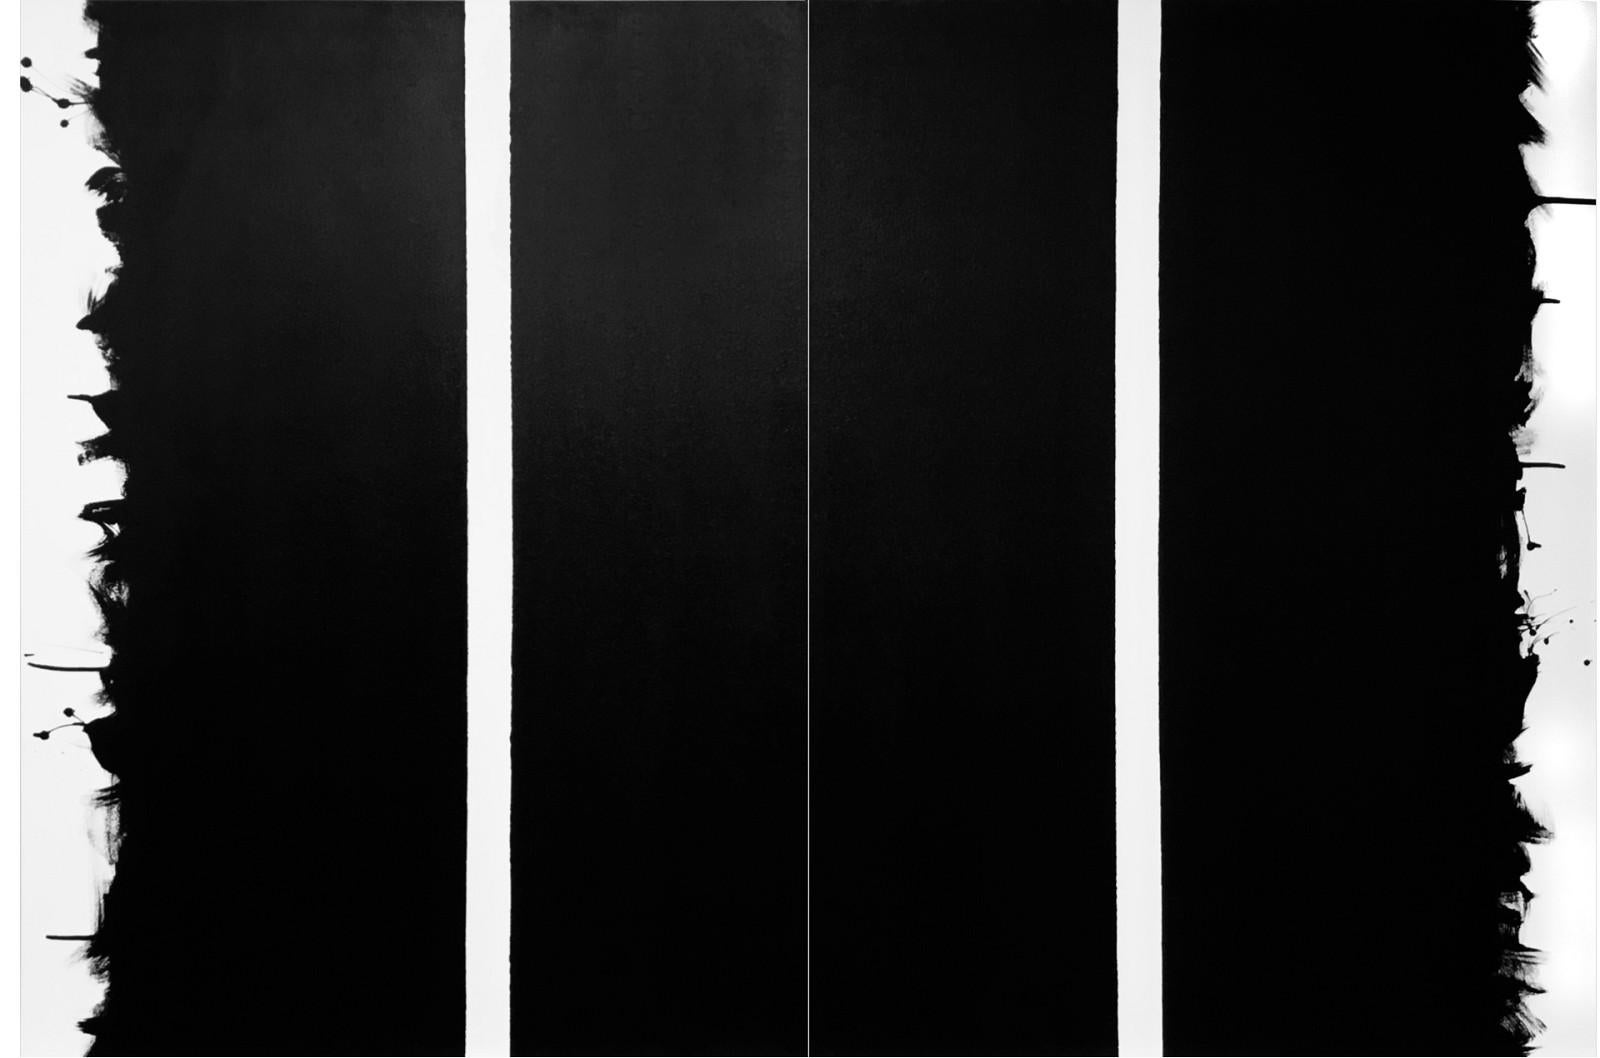 Paradox 01 02 - bold, black and white, abstract minimalist, acrylic on canvas - Contemporary Painting by Tim Forbes